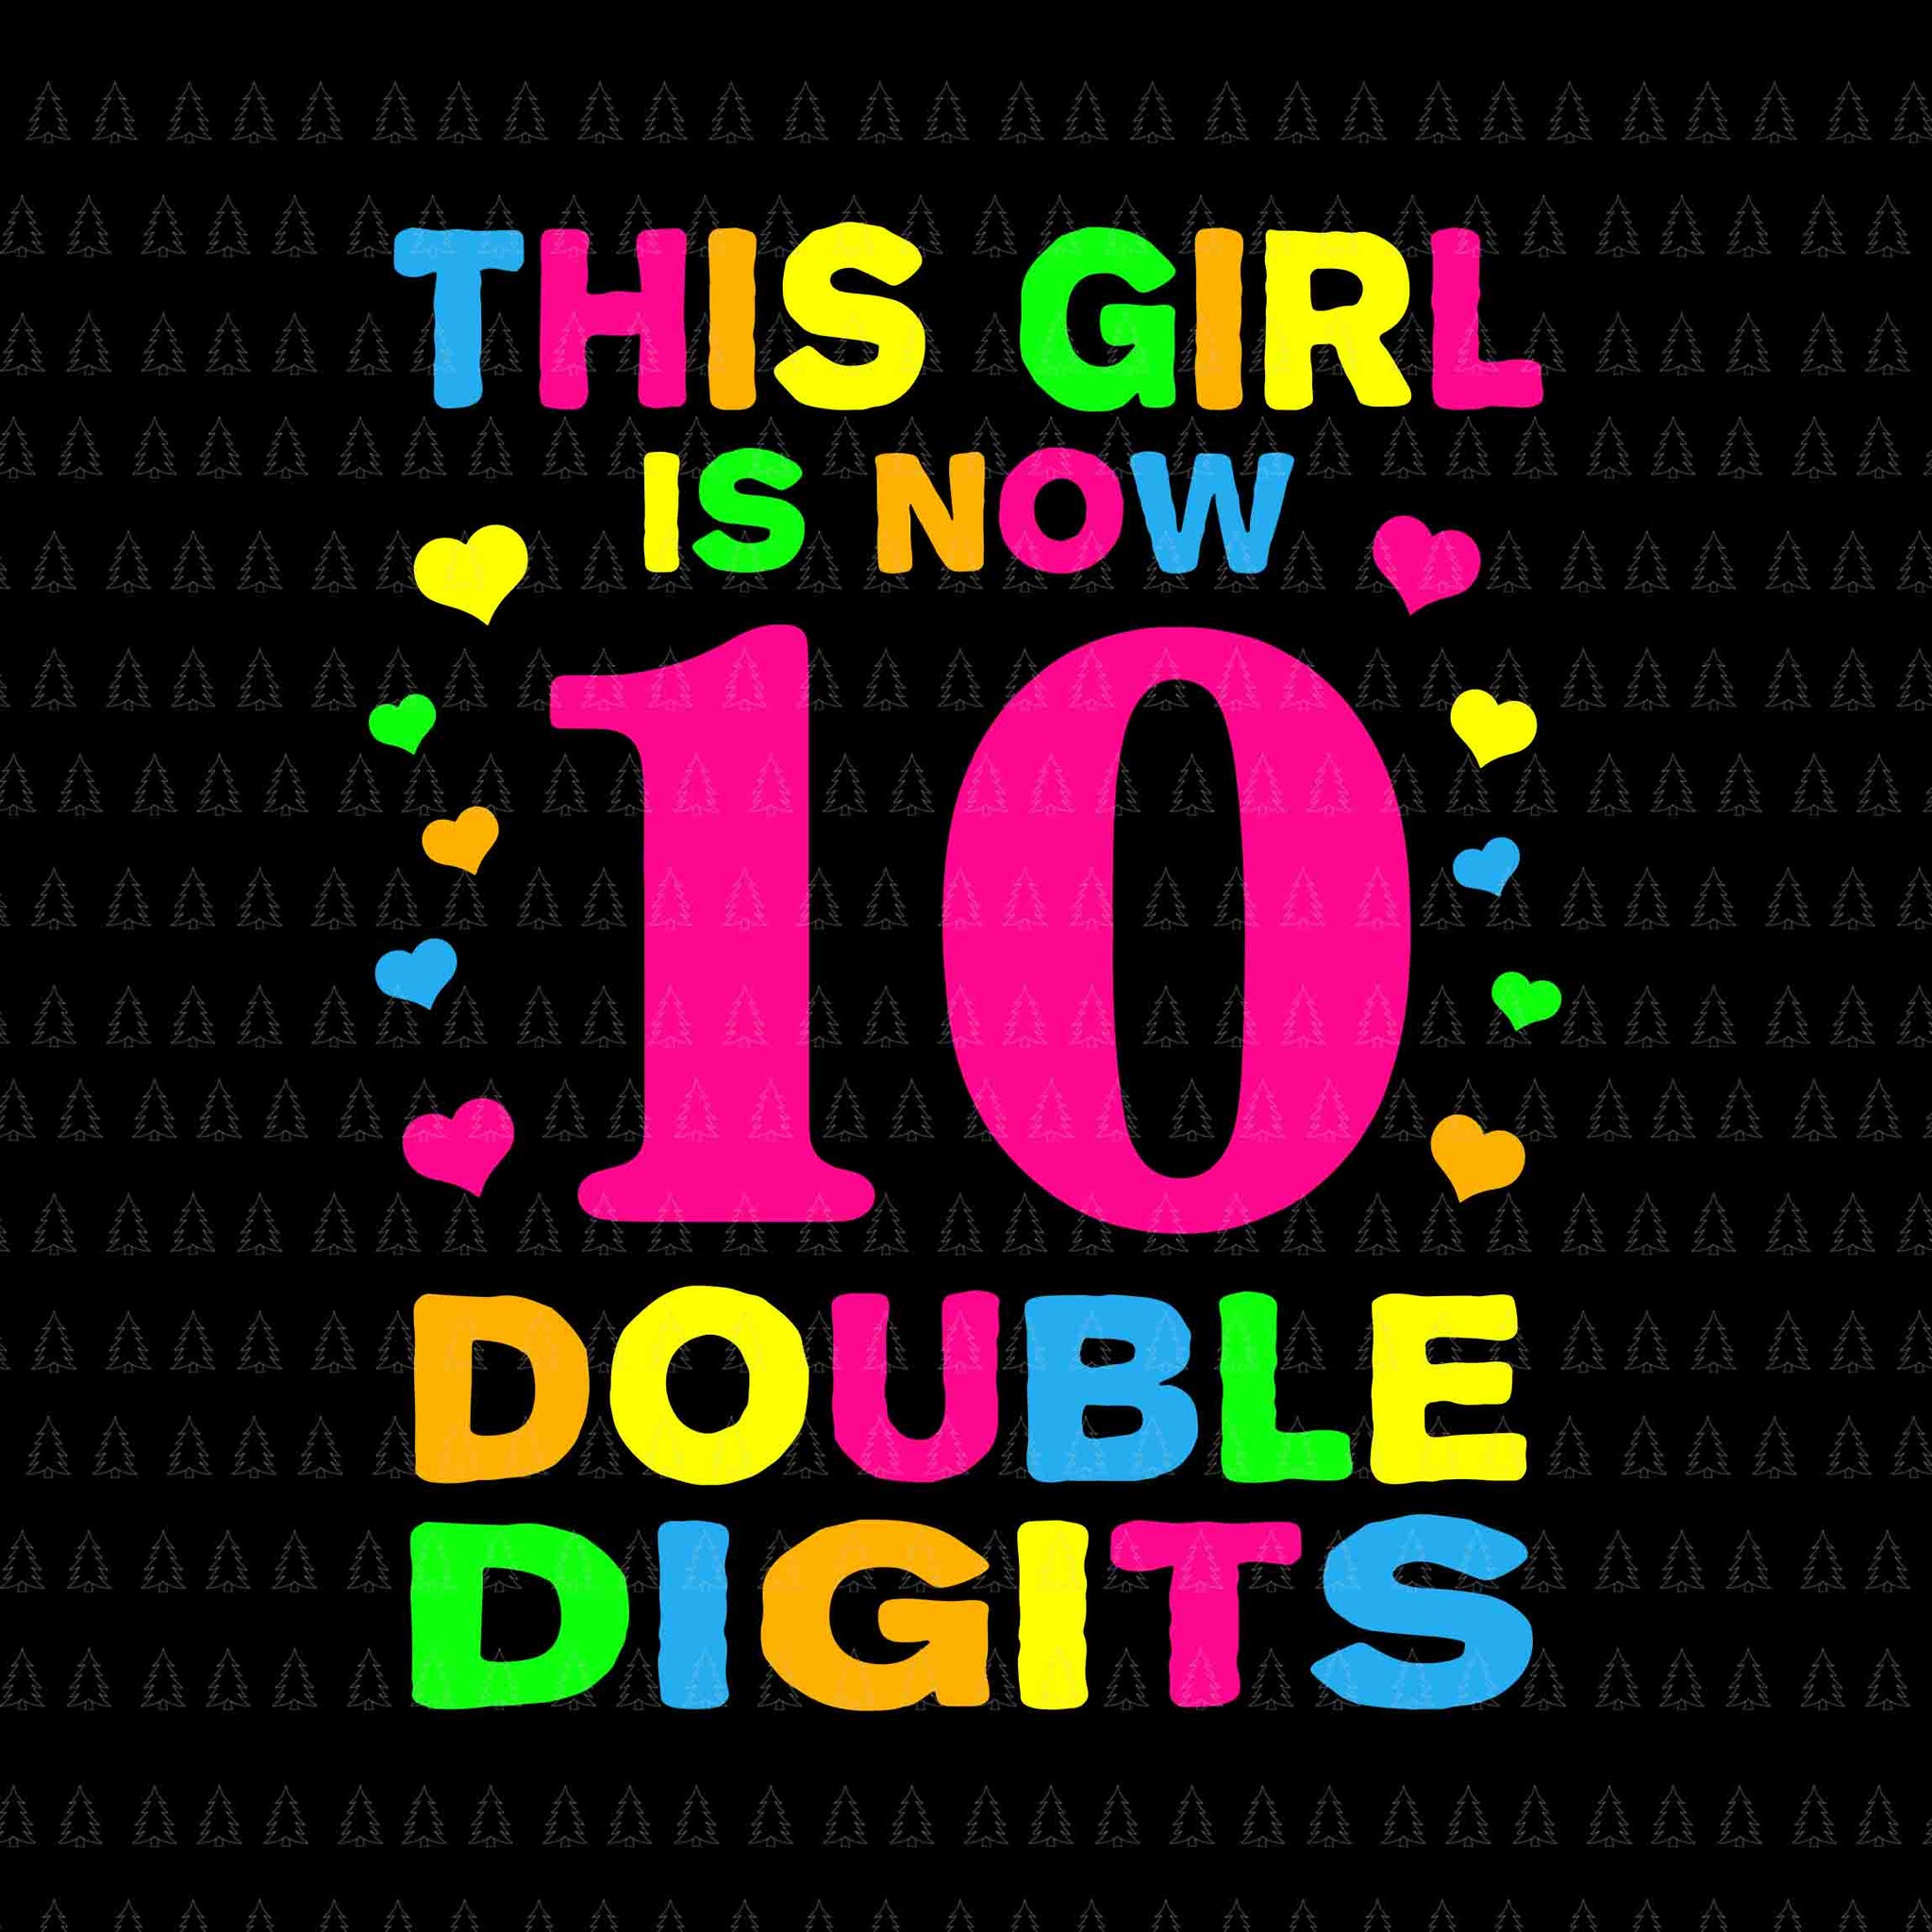 It's My 10th Birthday Svg, This Girl Is Now 10 Years Old Svg, This Girl Is Now Double Digits Svg, This Girl Svg